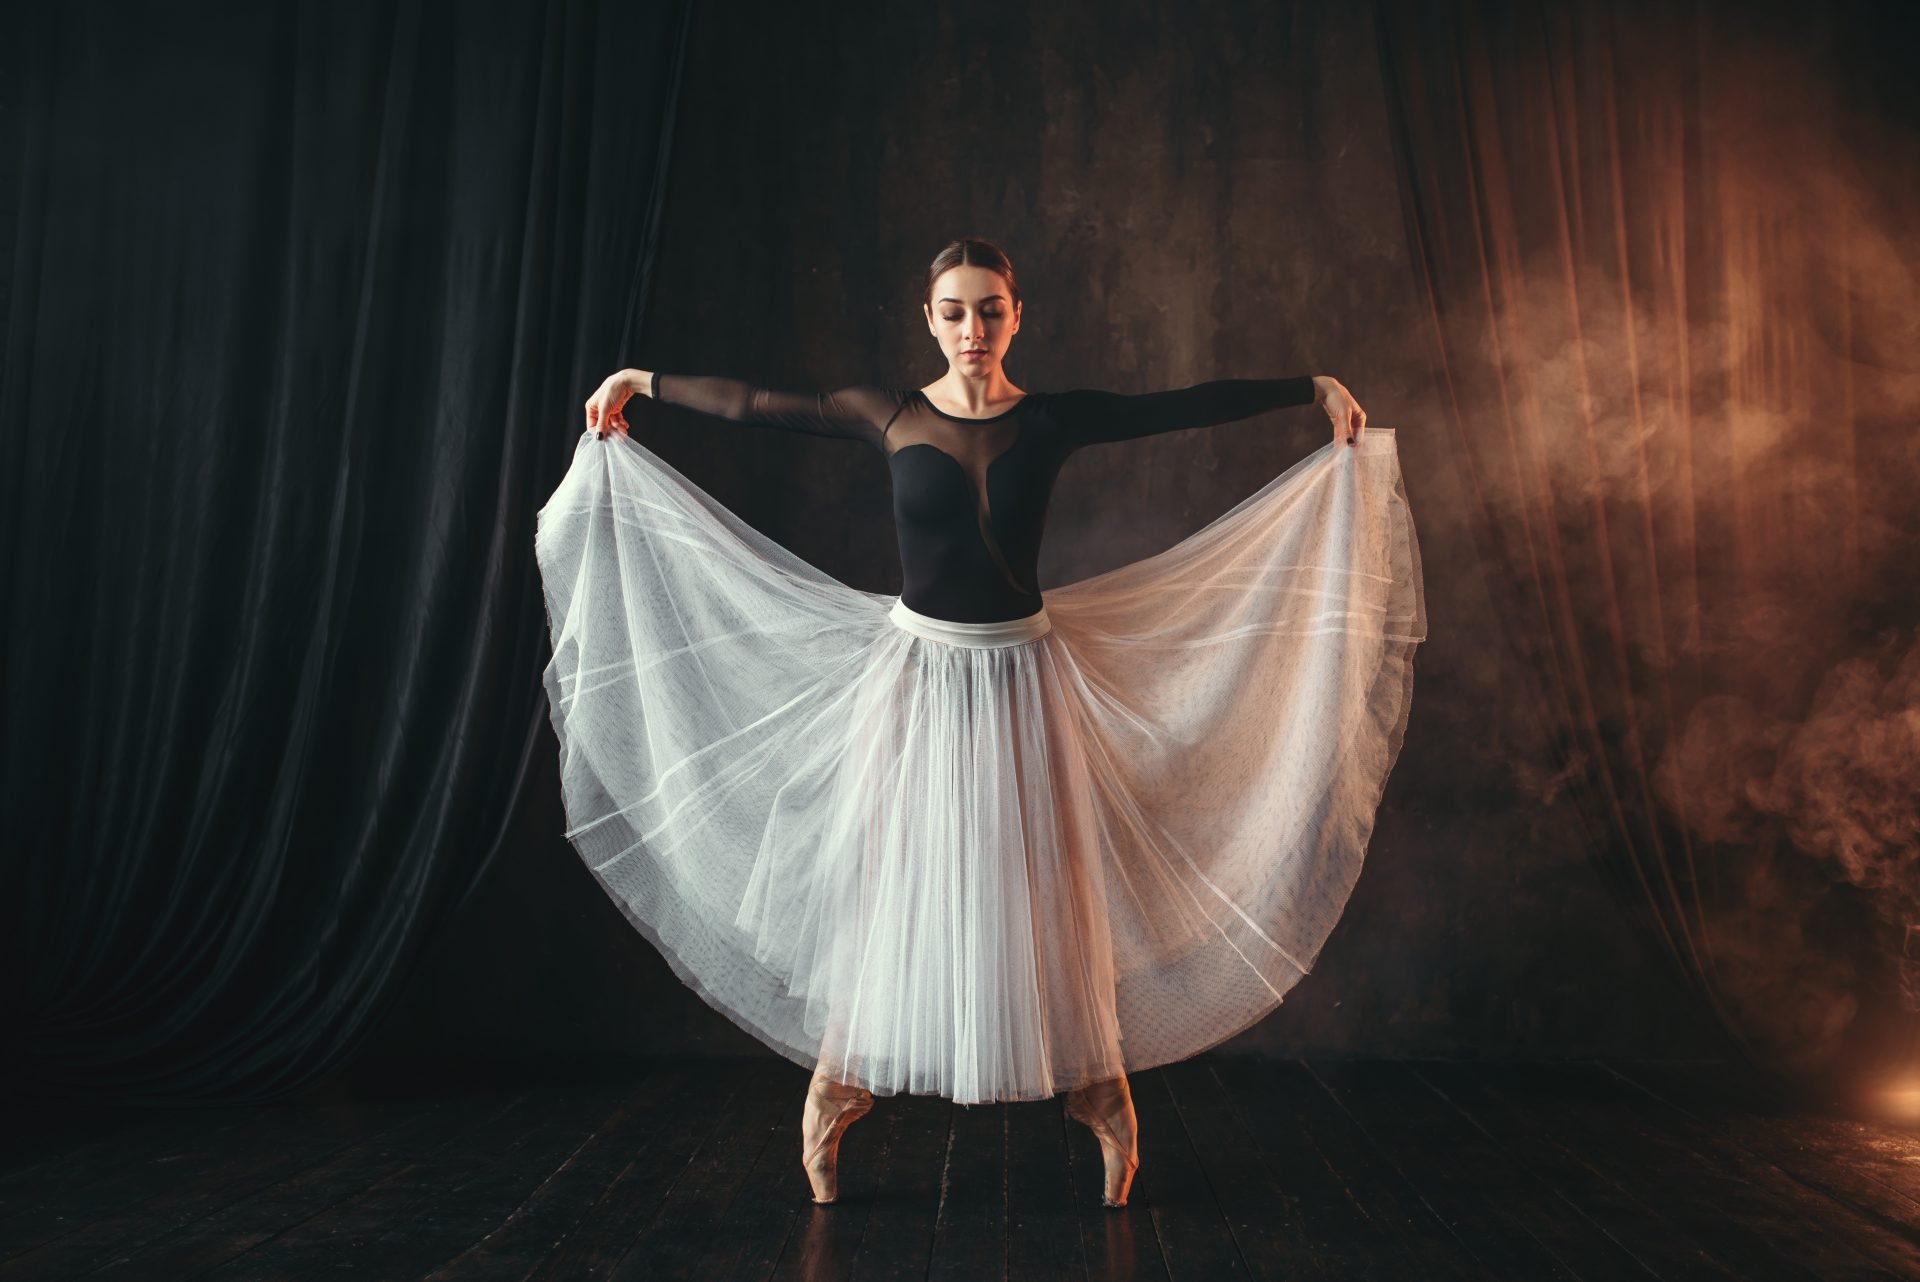 Classical ballet dancer in motion on the stage